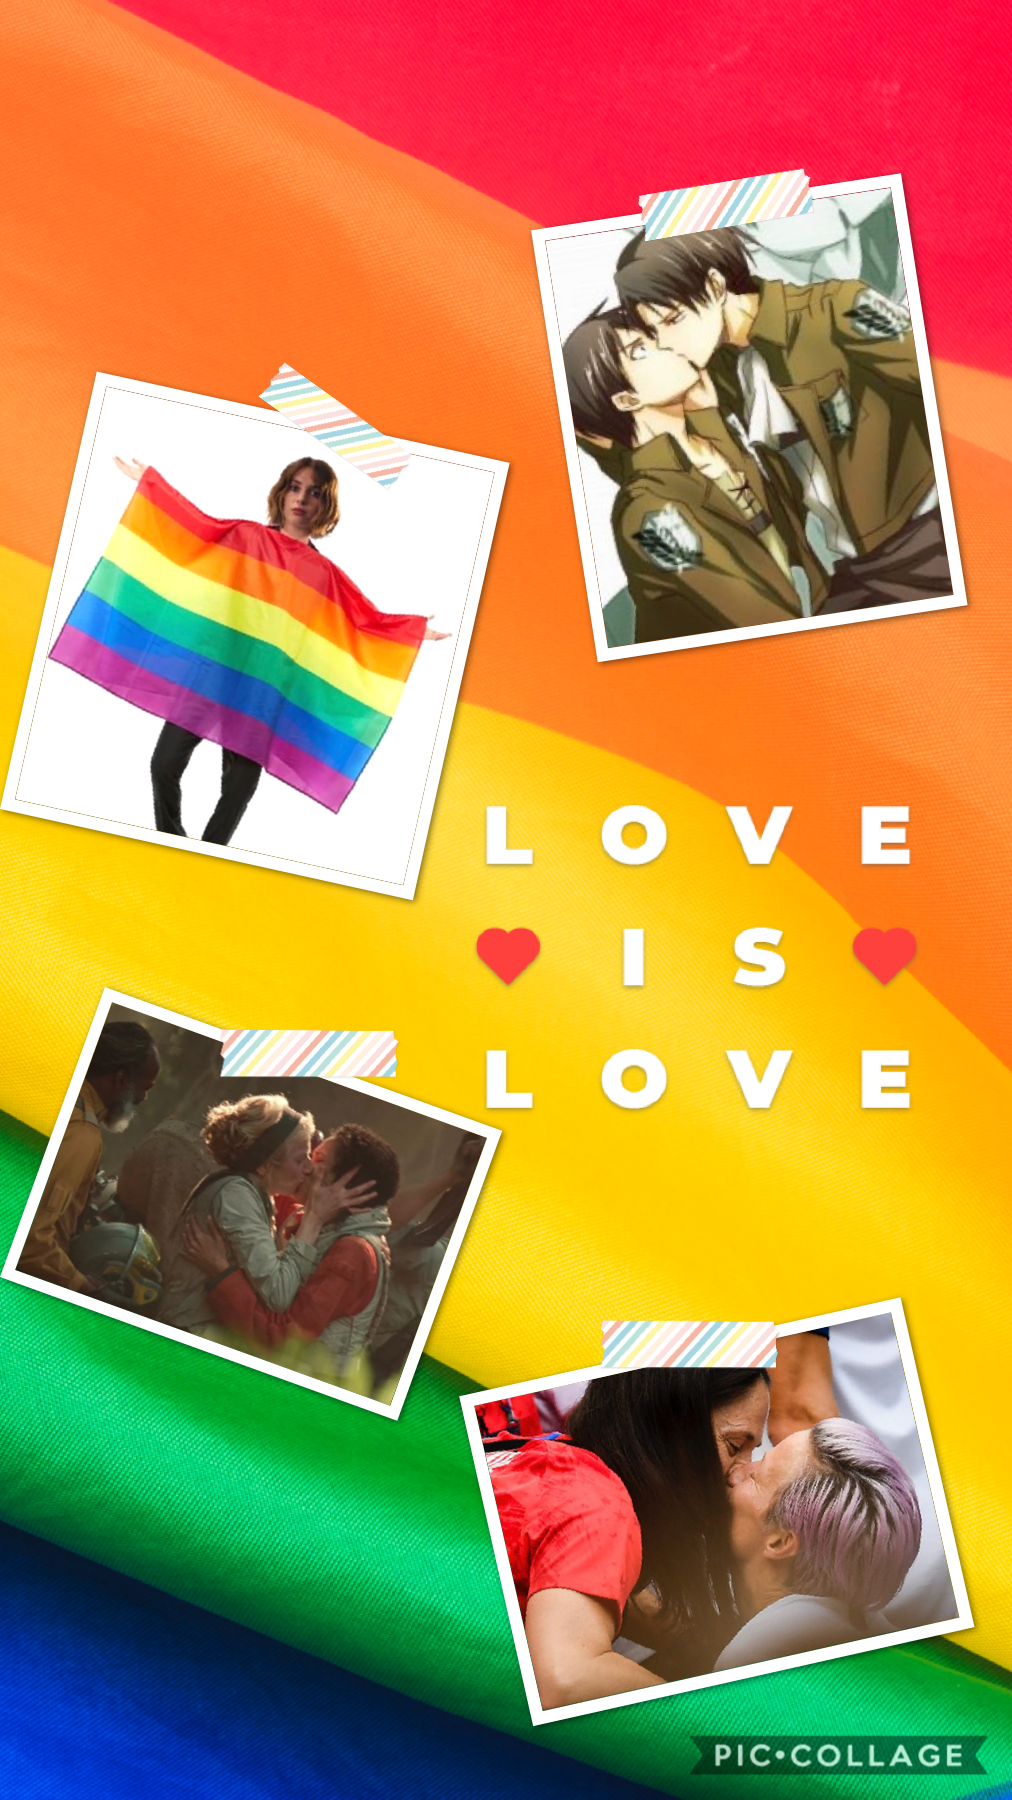 My favorite Gay couples from Attack on Titan, Stranger Things, Star Wars, and the USWNT. Happy Pride Month ♥️